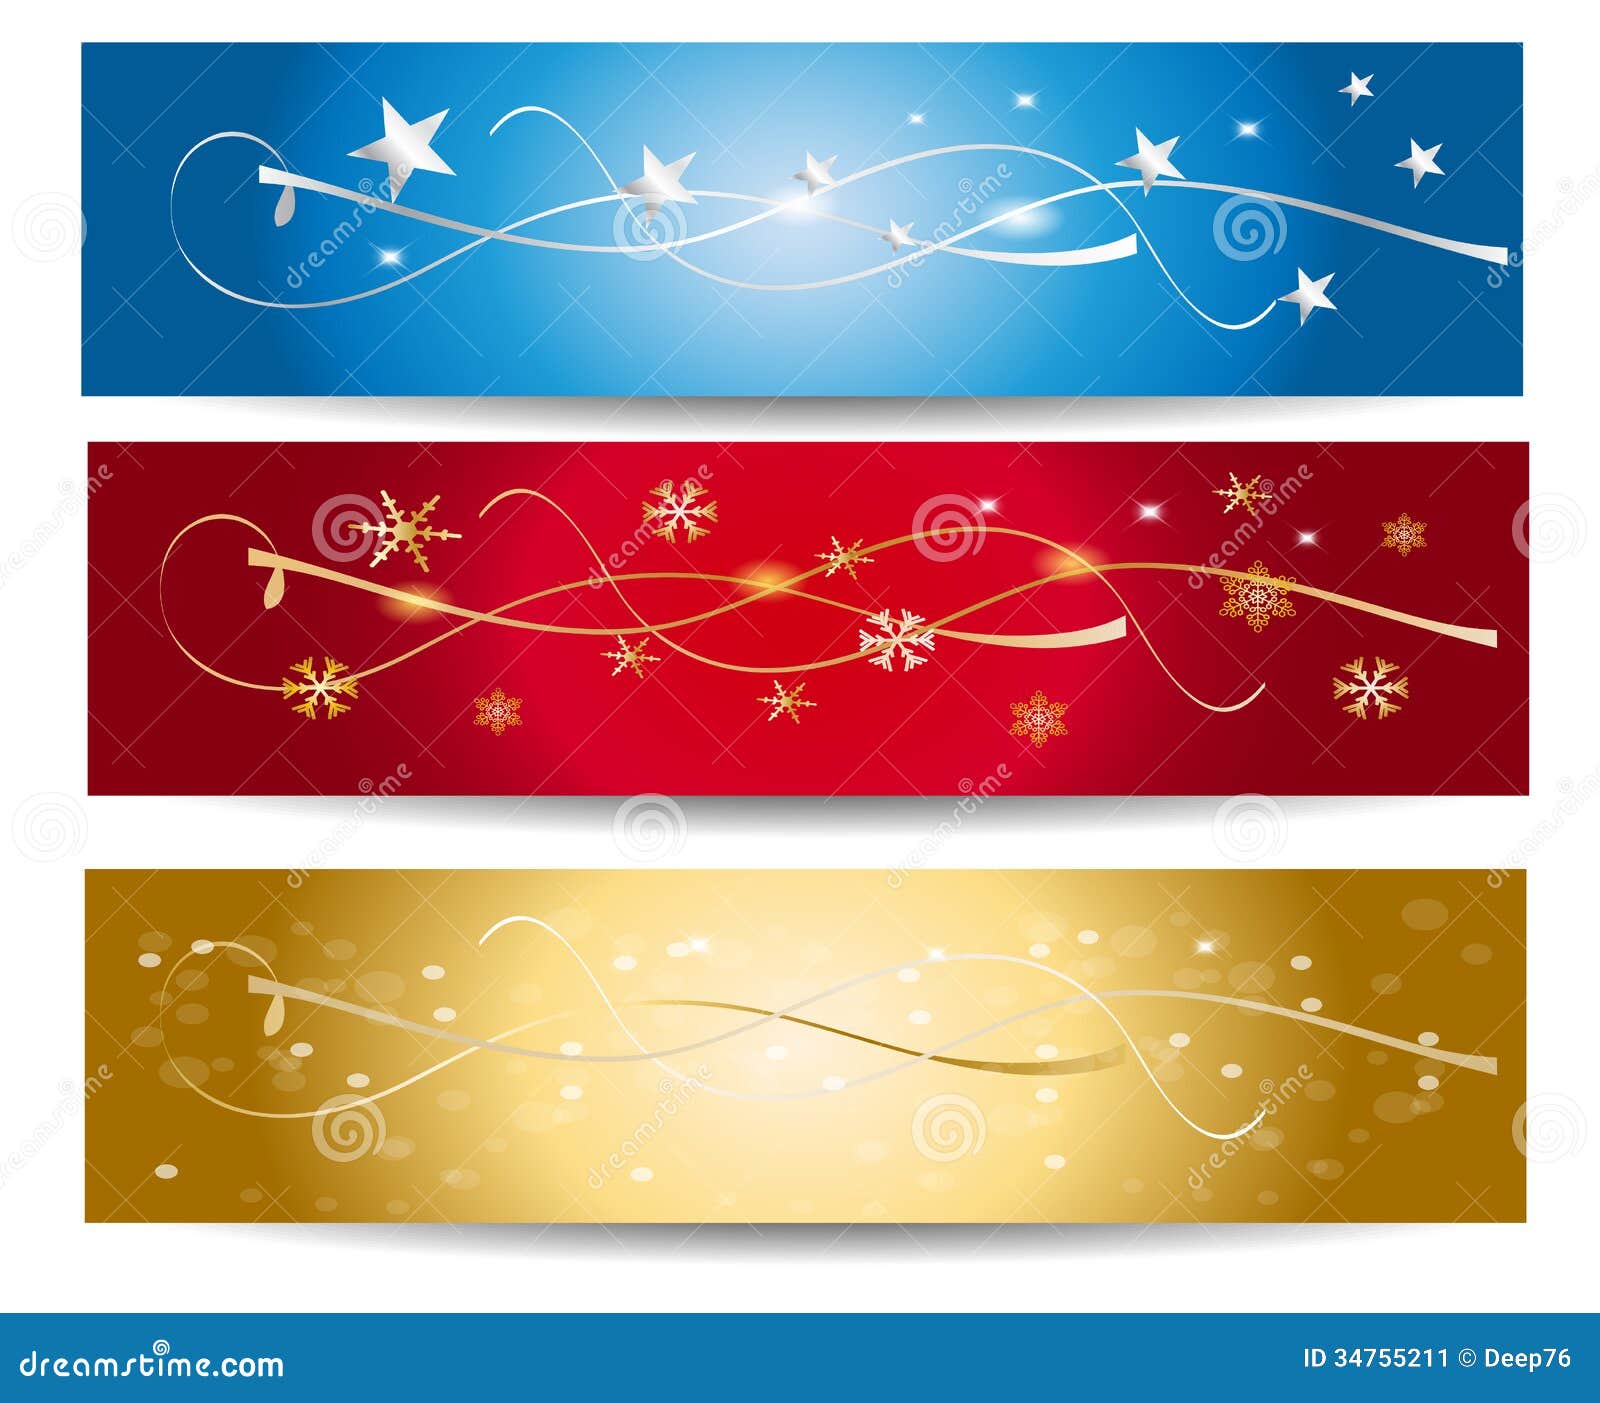 Colorful Christmas Vector Banner Stock Vector - Illustration of ...